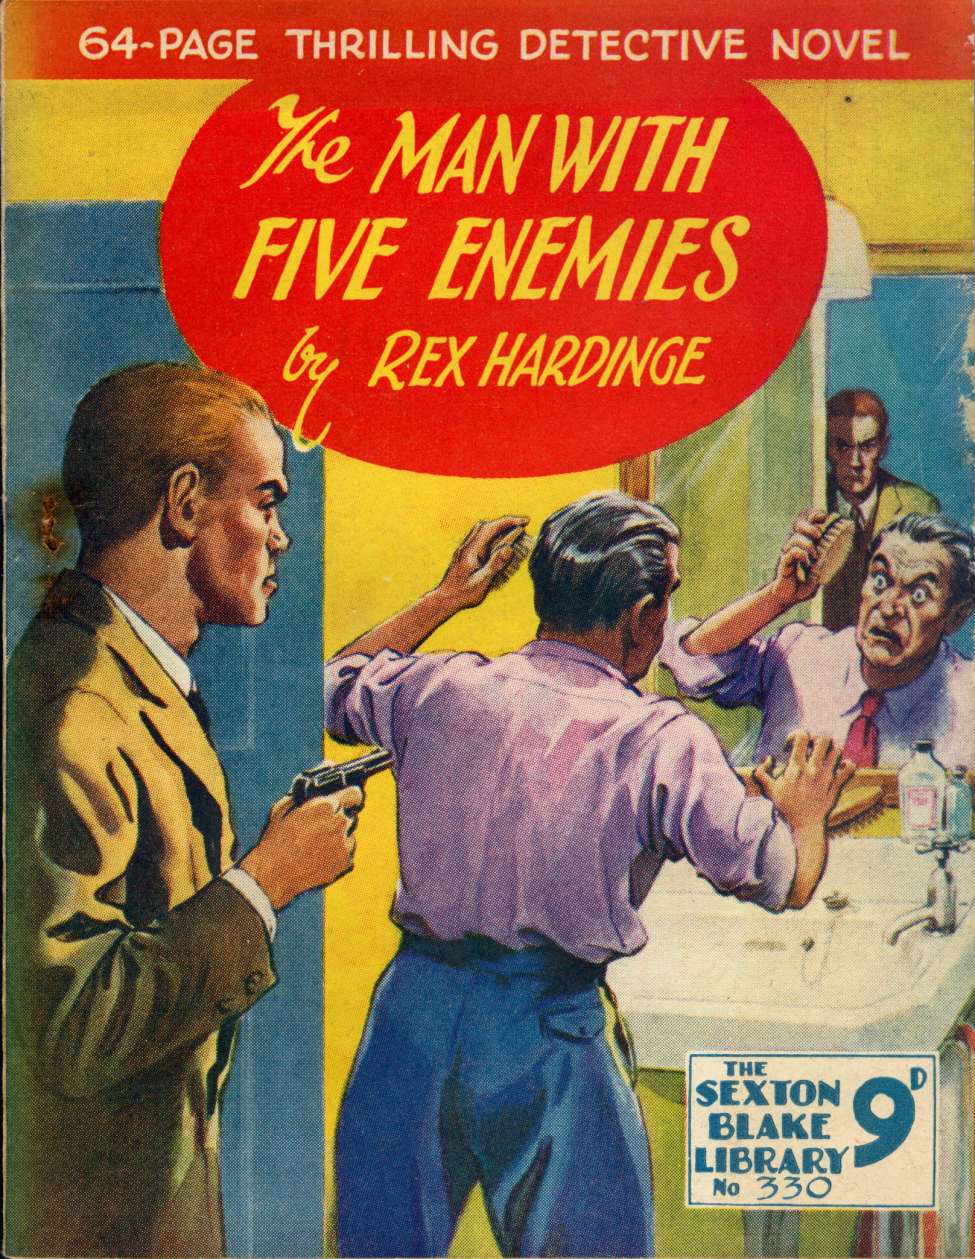 Book Cover For Sexton Blake Library S3 330 - The Man with Five Enemies